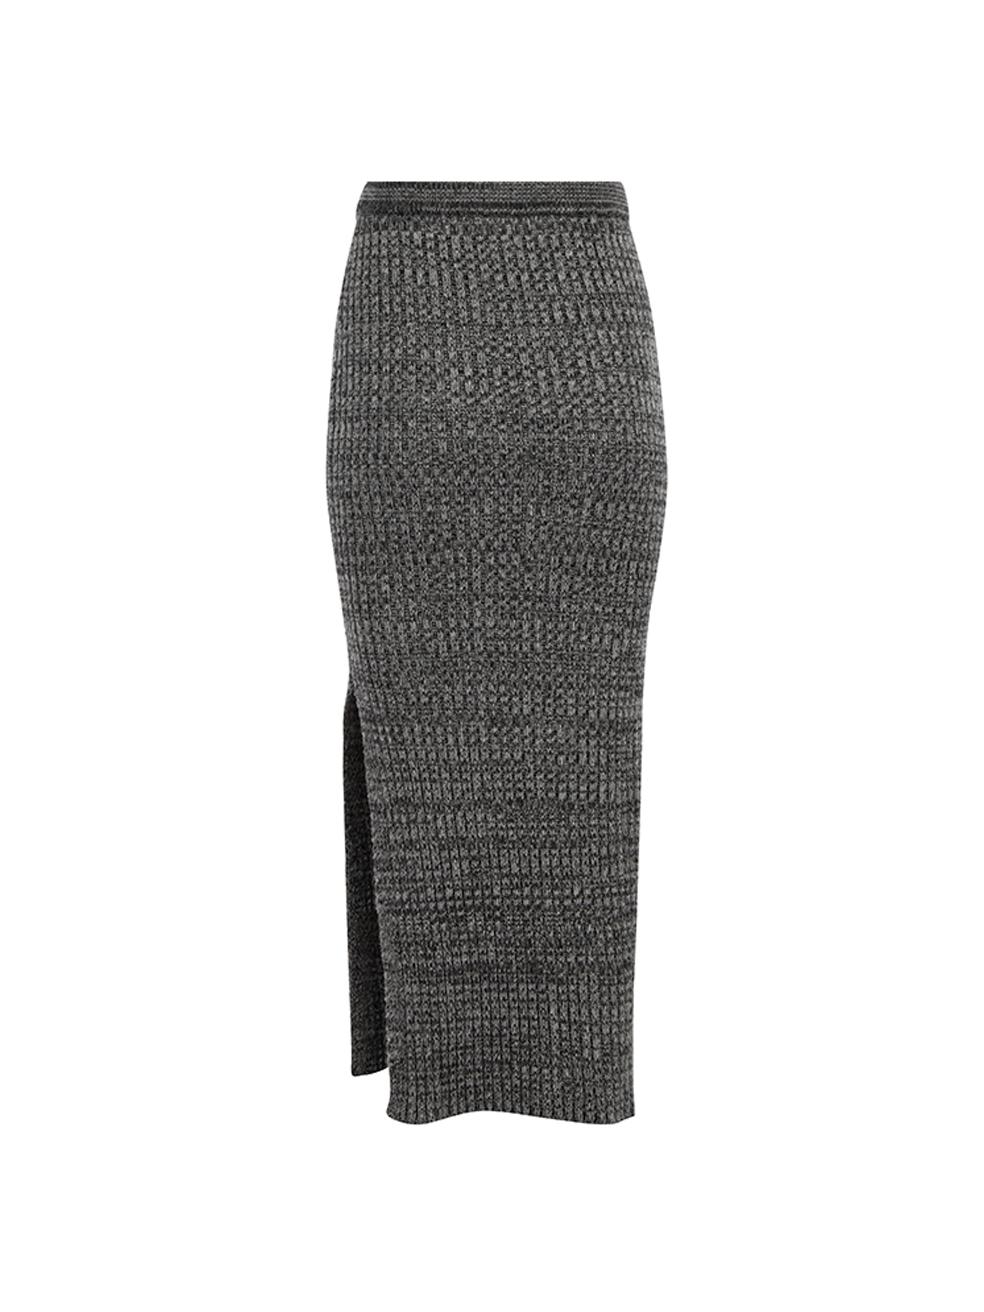 Pinko Women's Grey Knit Midi Skirt In Excellent Condition For Sale In London, GB